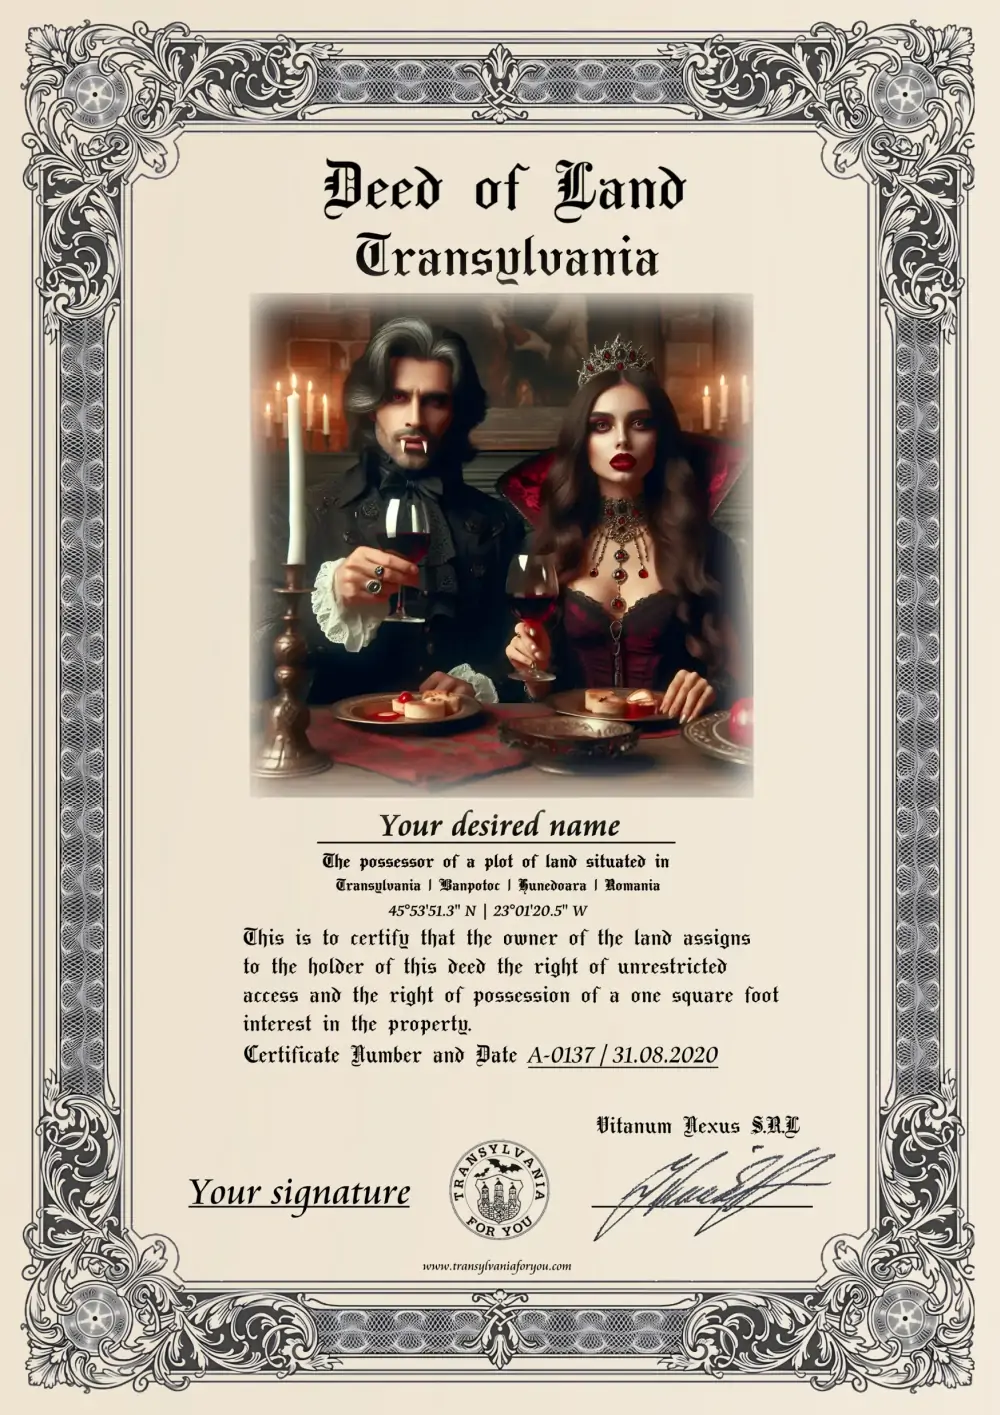 Image on the deed: Count Dracula with vampire lady